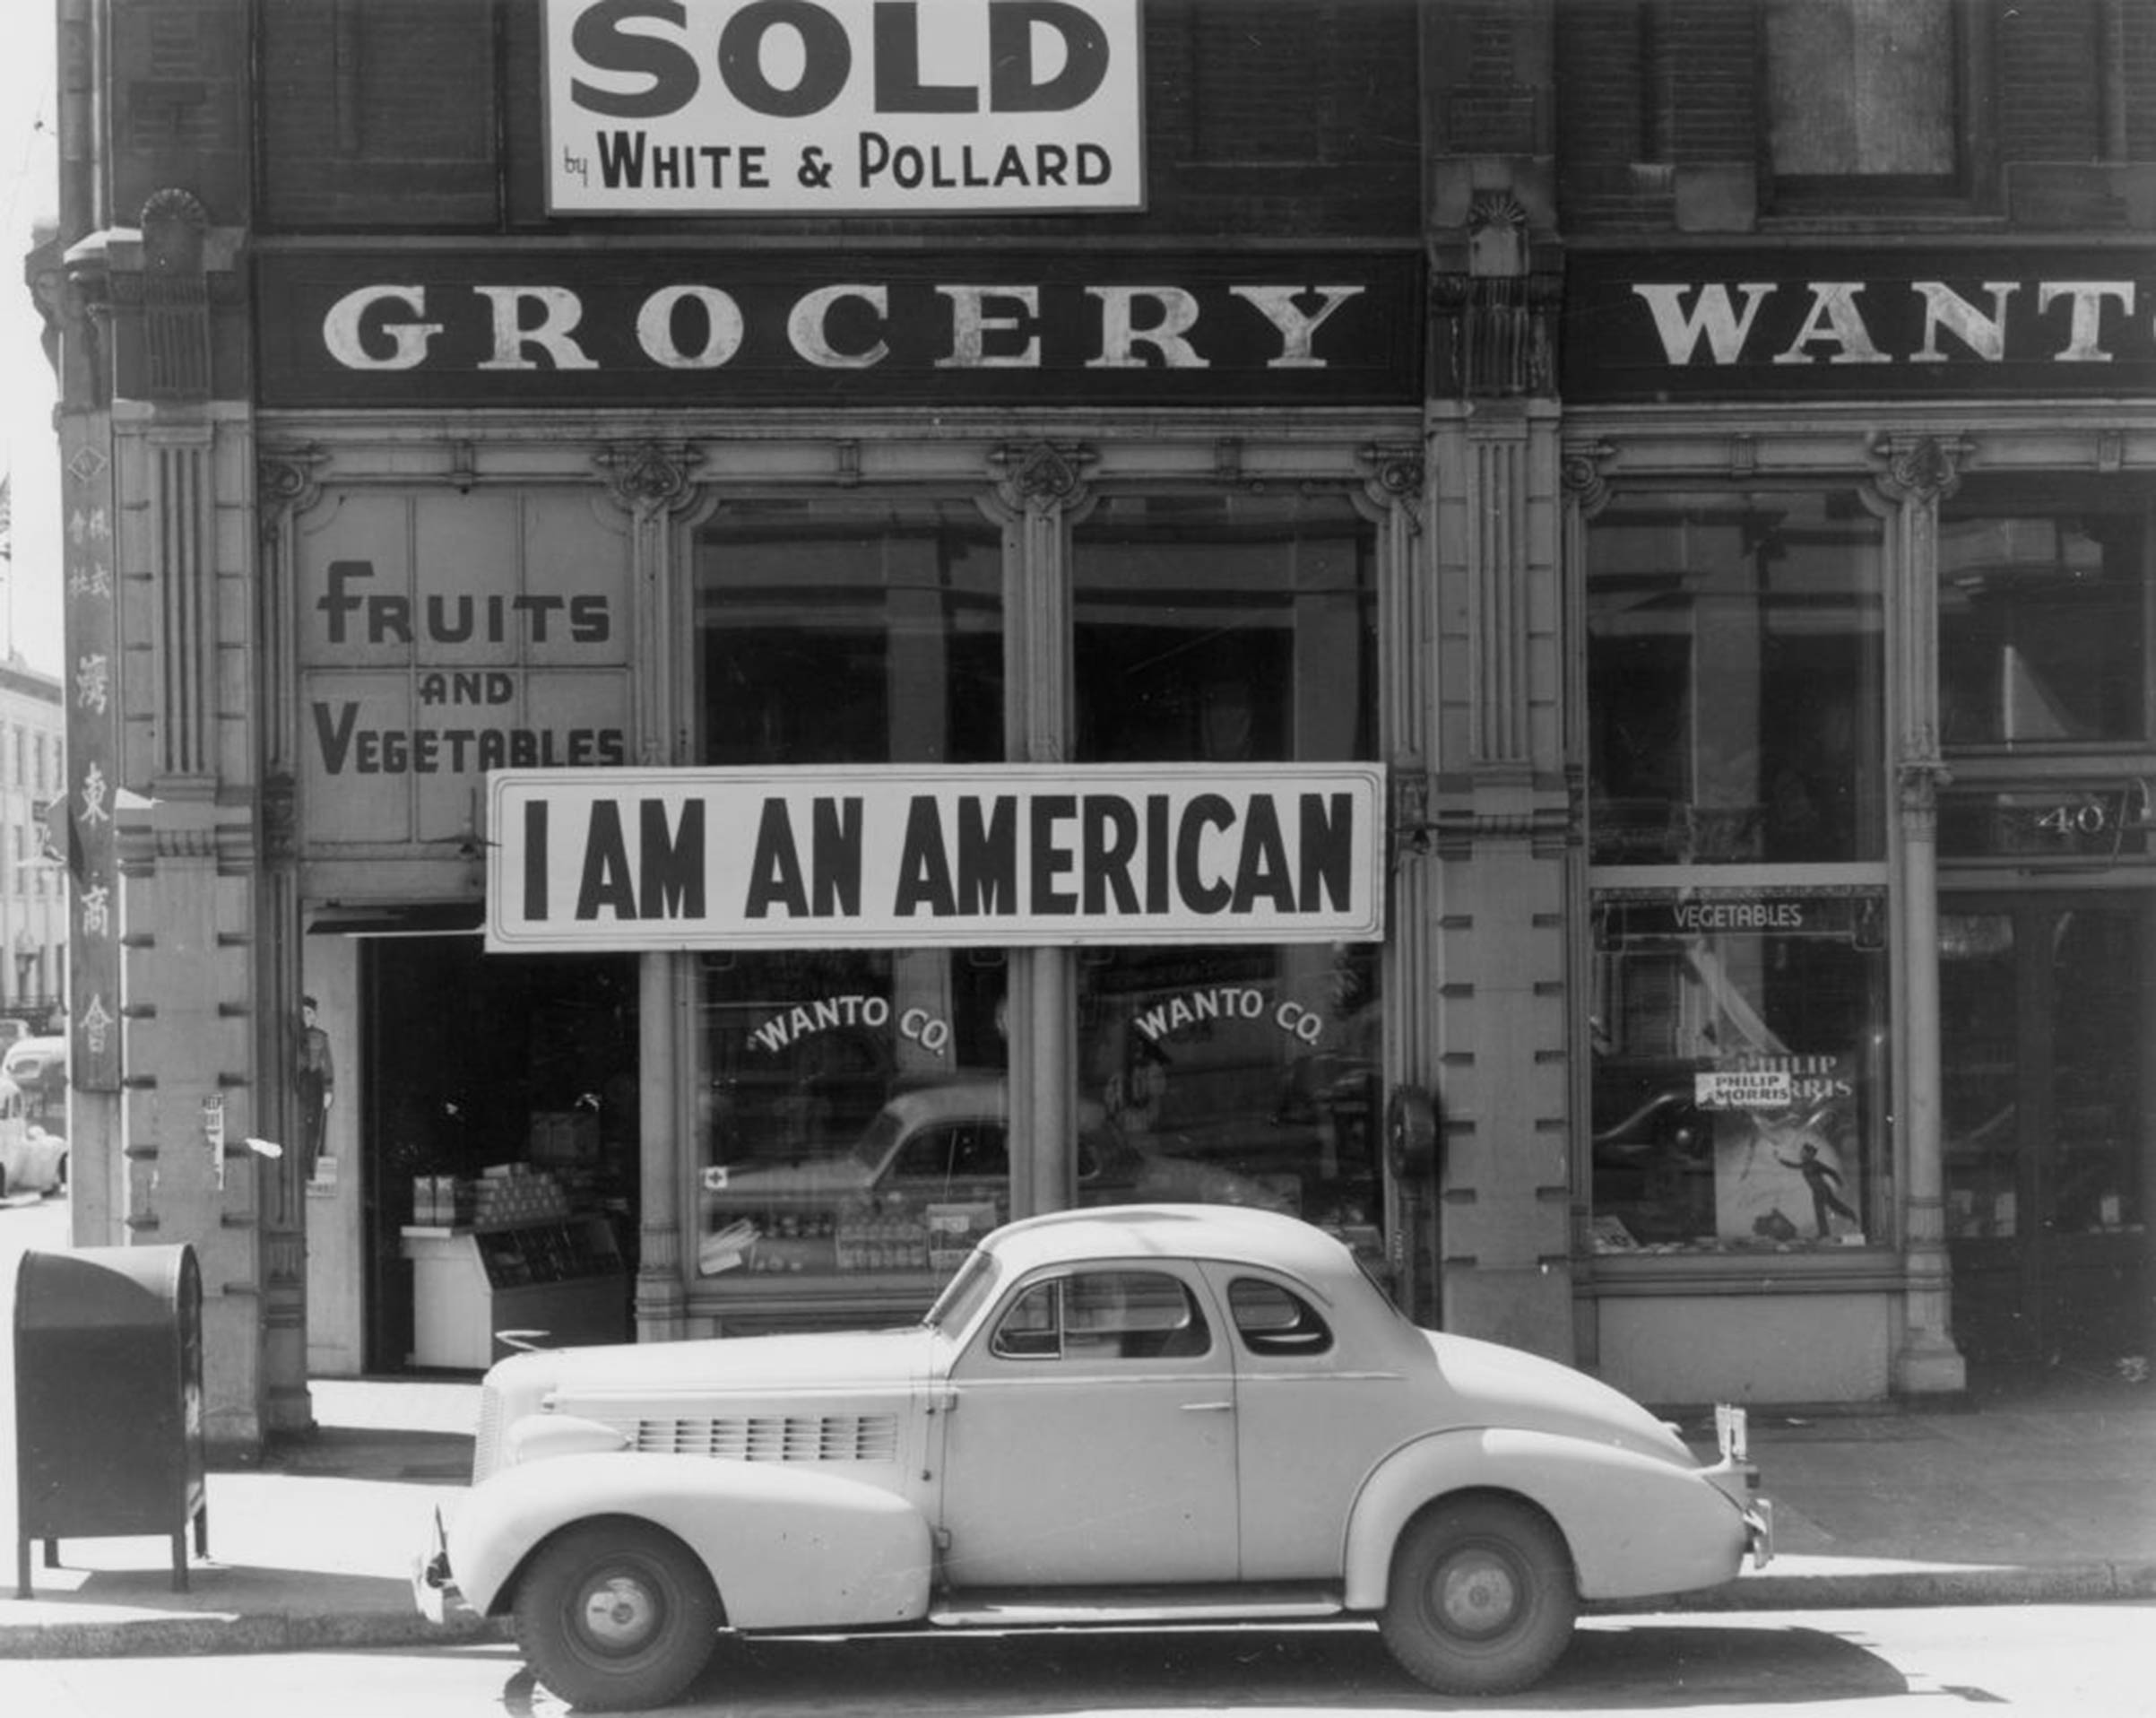 The day after Pearl Harbor, and following evacuation orders for Japanese living in America, the owner of this shop in Oakland, California, who was a University of California graduate of Japanese descent, put this notice across his shop front on Dec. 8, 1941. (Dorothea Lange—Getty Images)